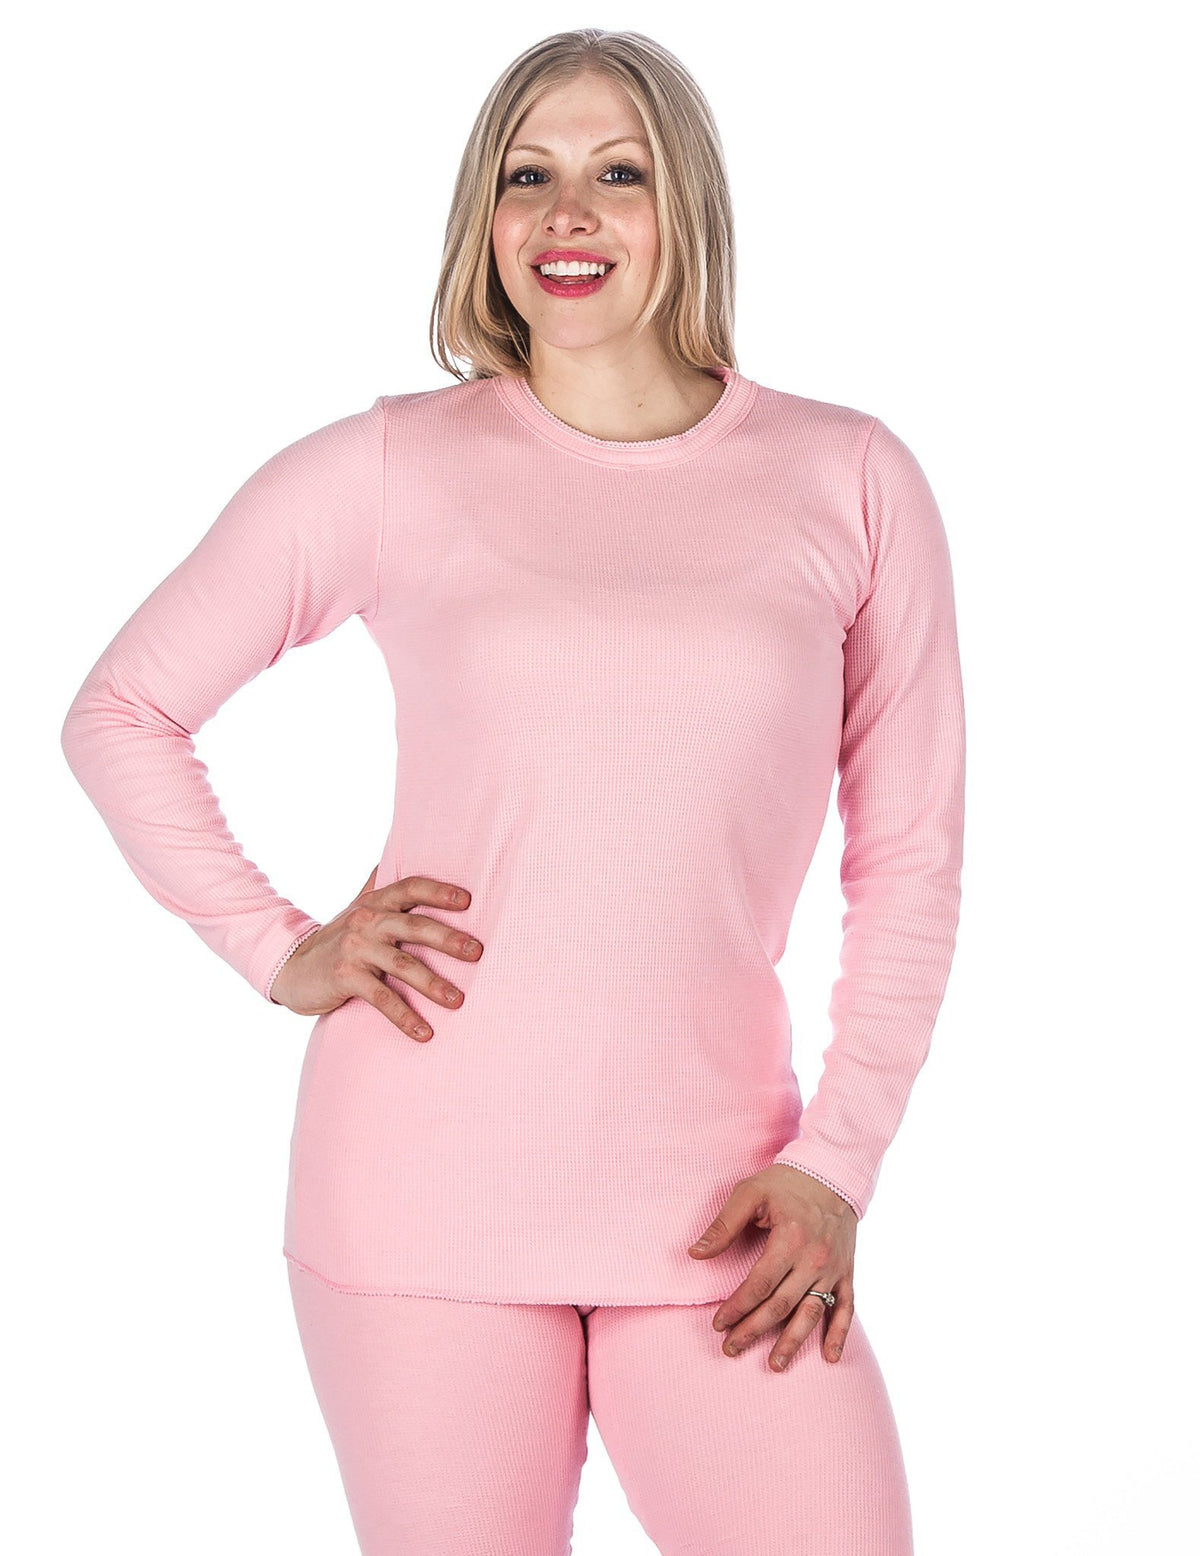 Women's Extreme Cold Waffle Knit Thermal Crew Top - Pink